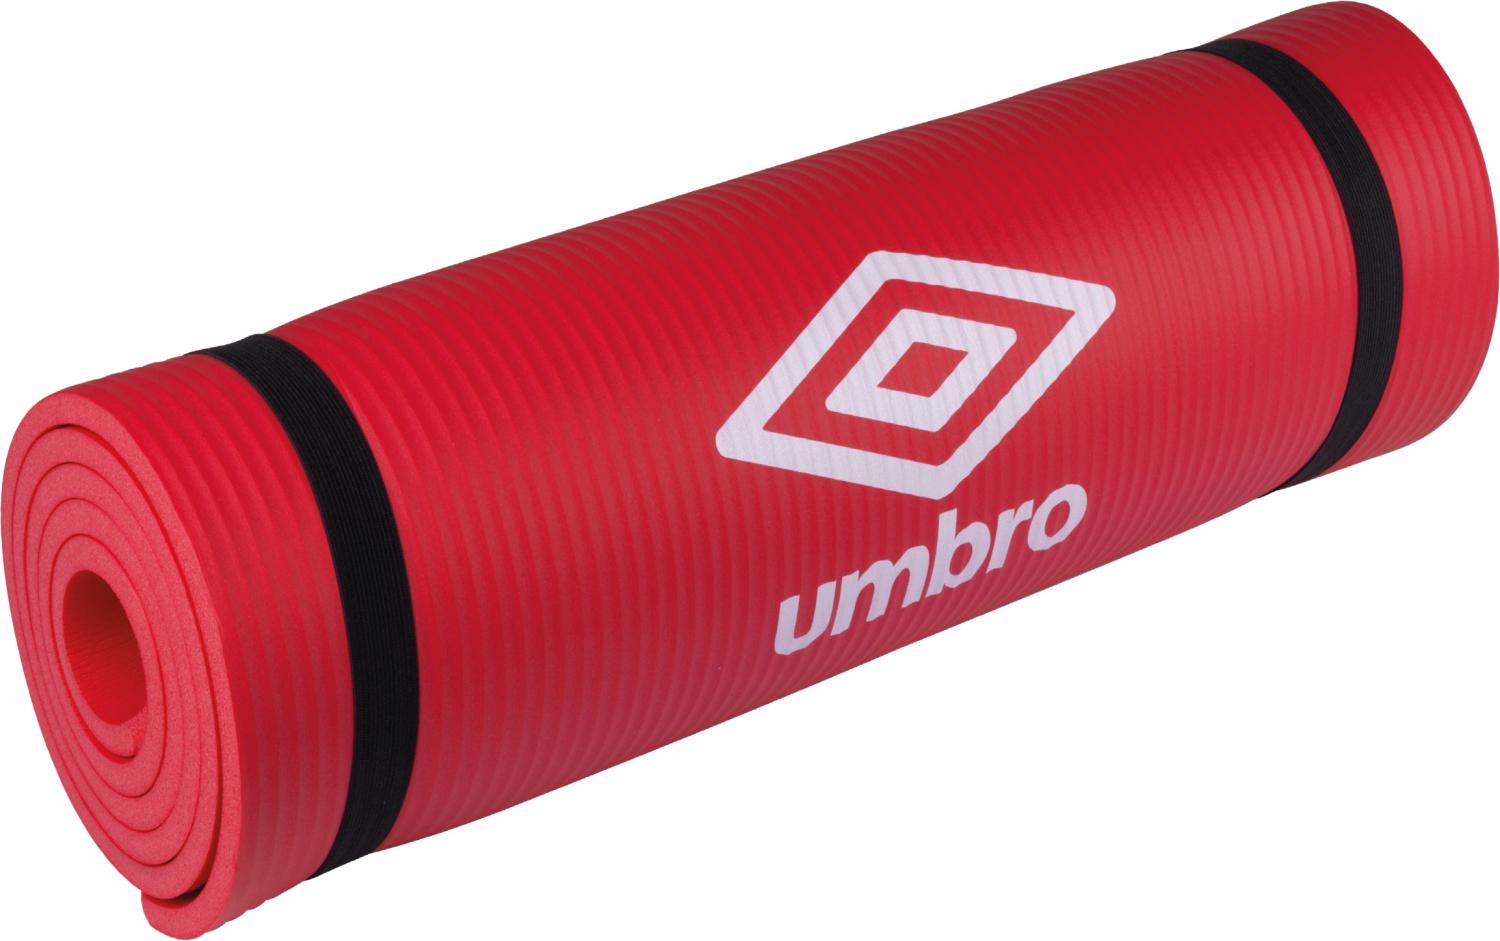 Umbro Red Fitness and Yoga Mat 190x58x1cm